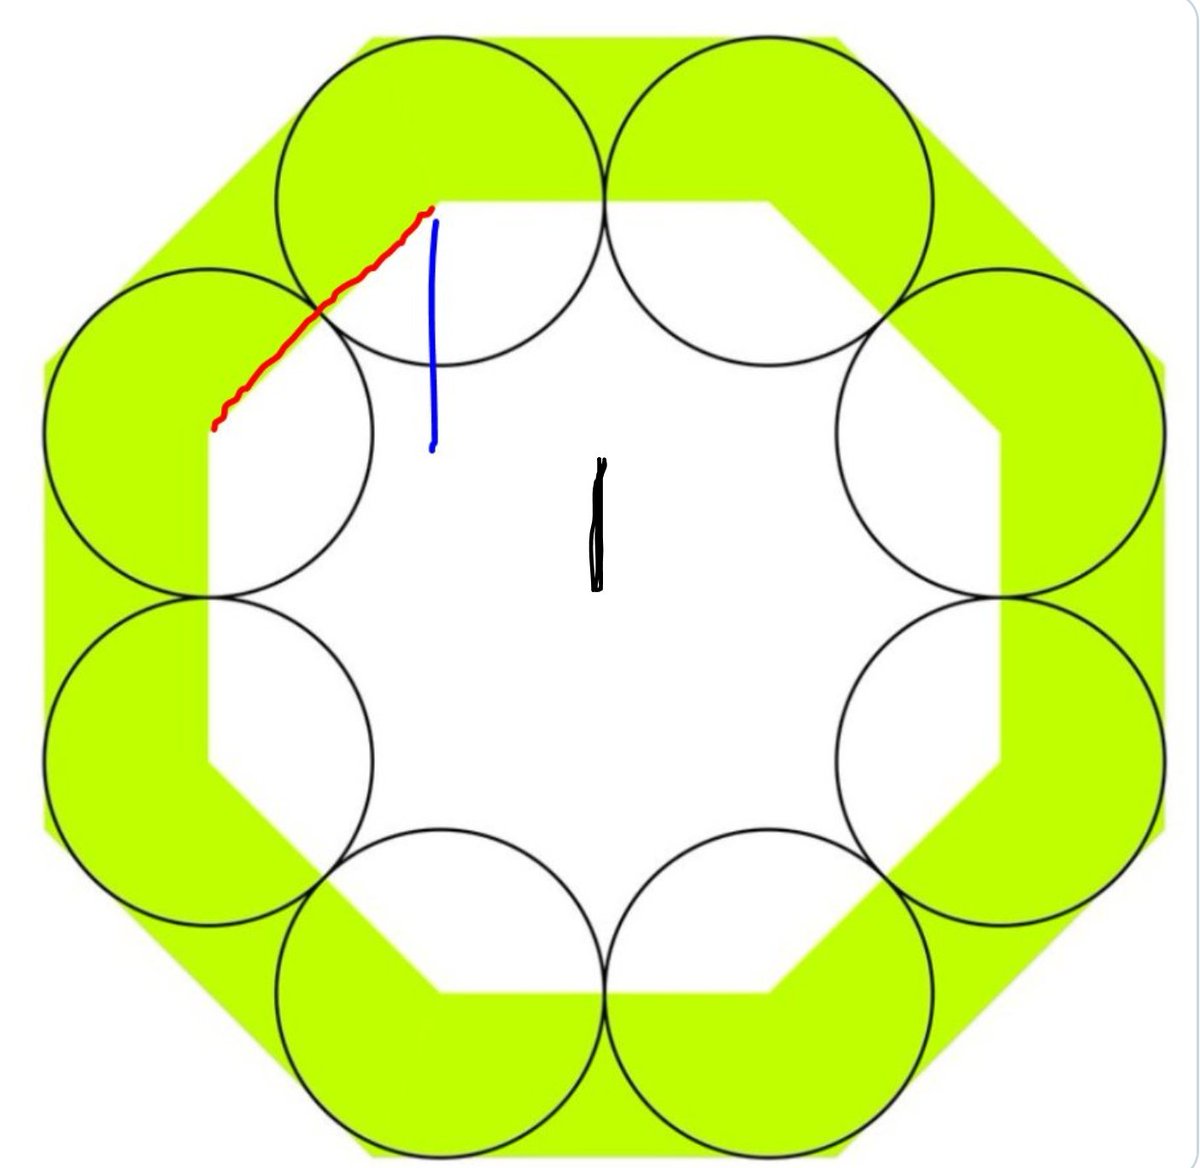 Look at this black line, which takes us down to the centre of the octagons.